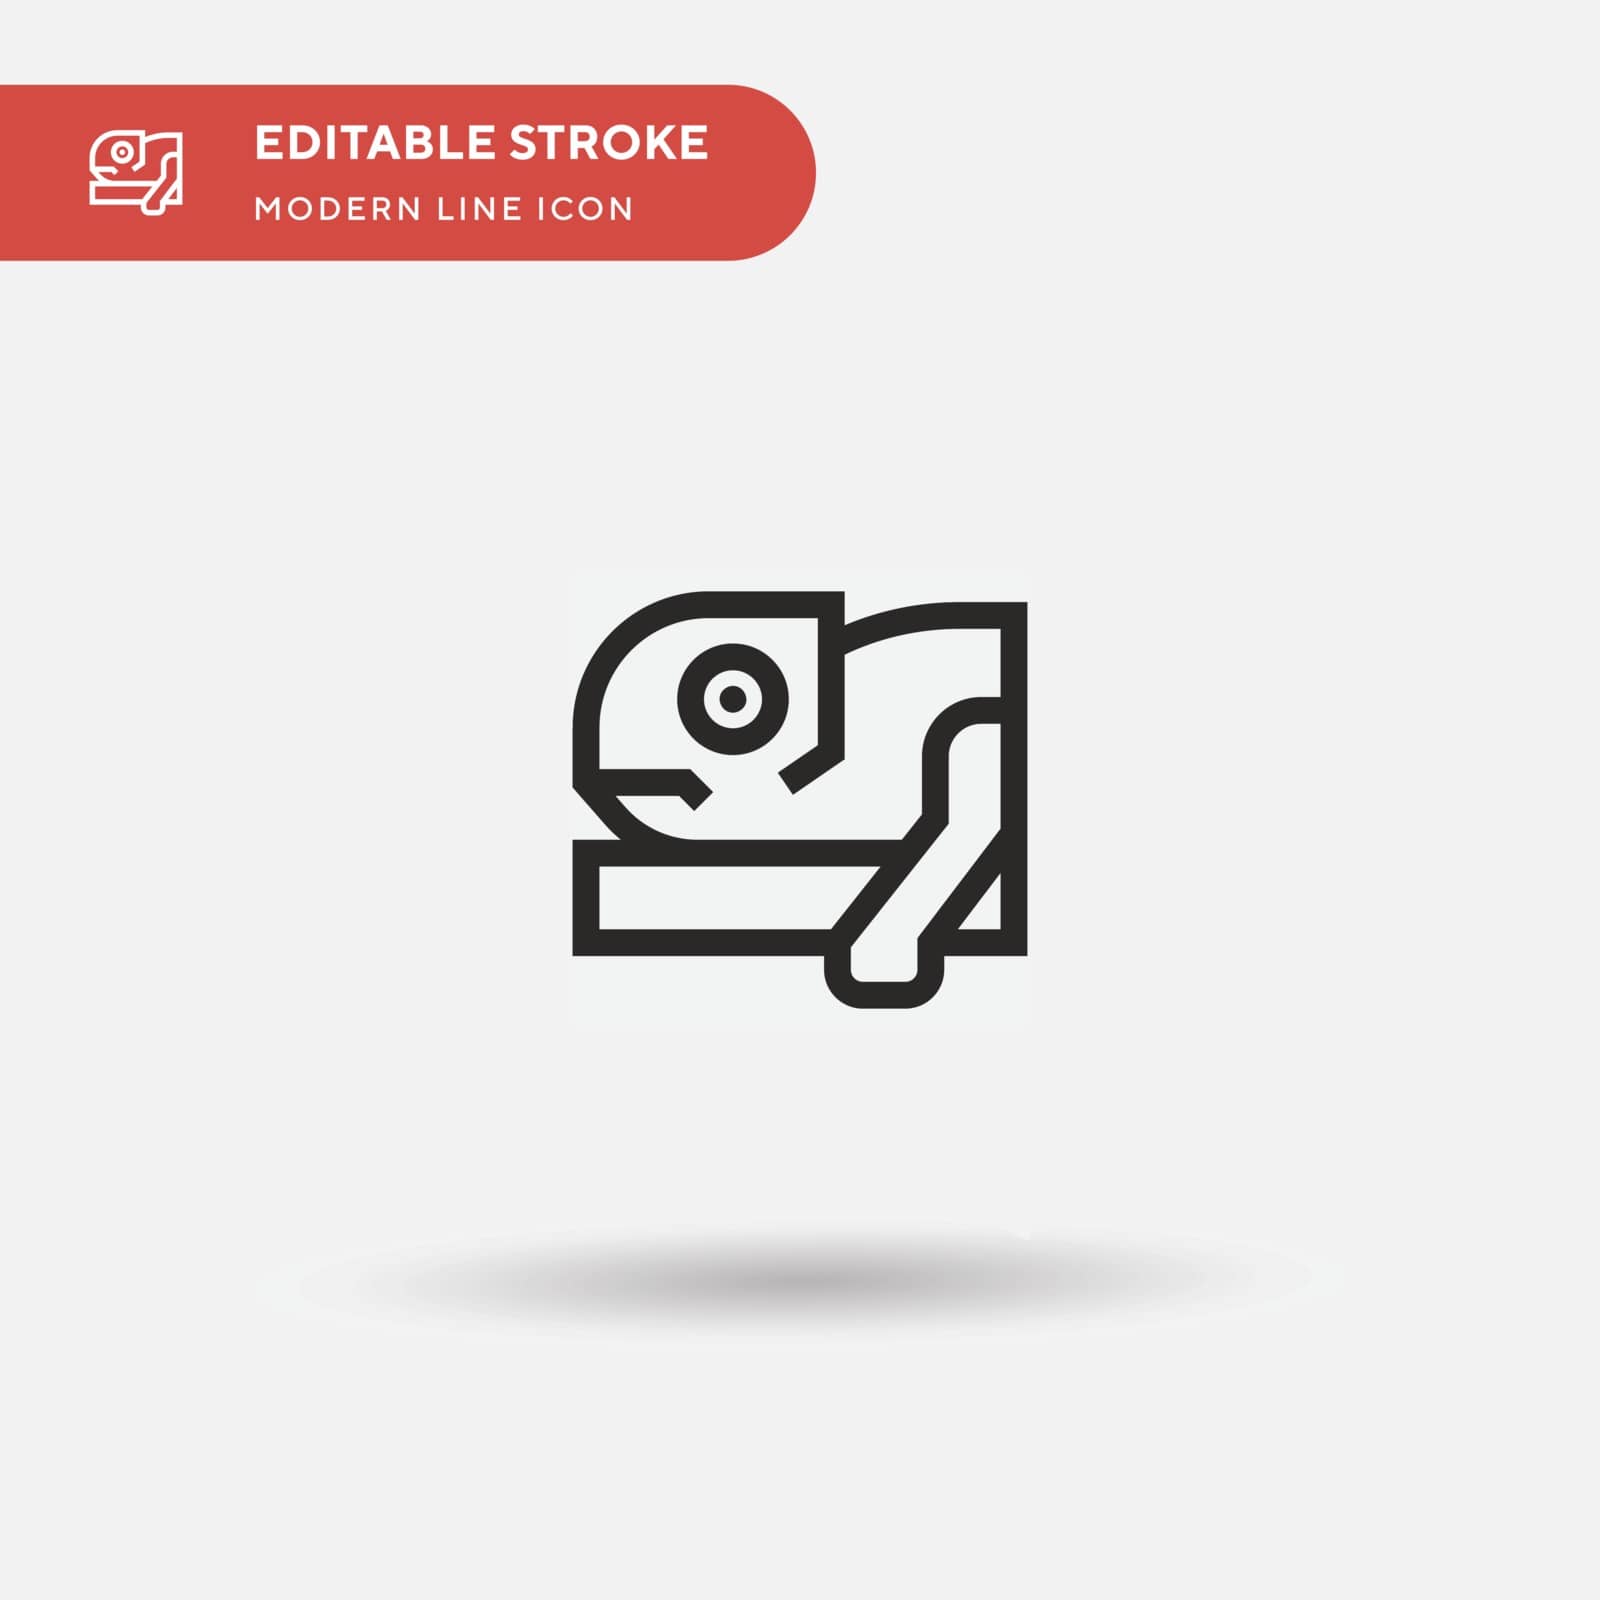 Chameleon Simple vector icon. Illustration symbol design templat by guapoo